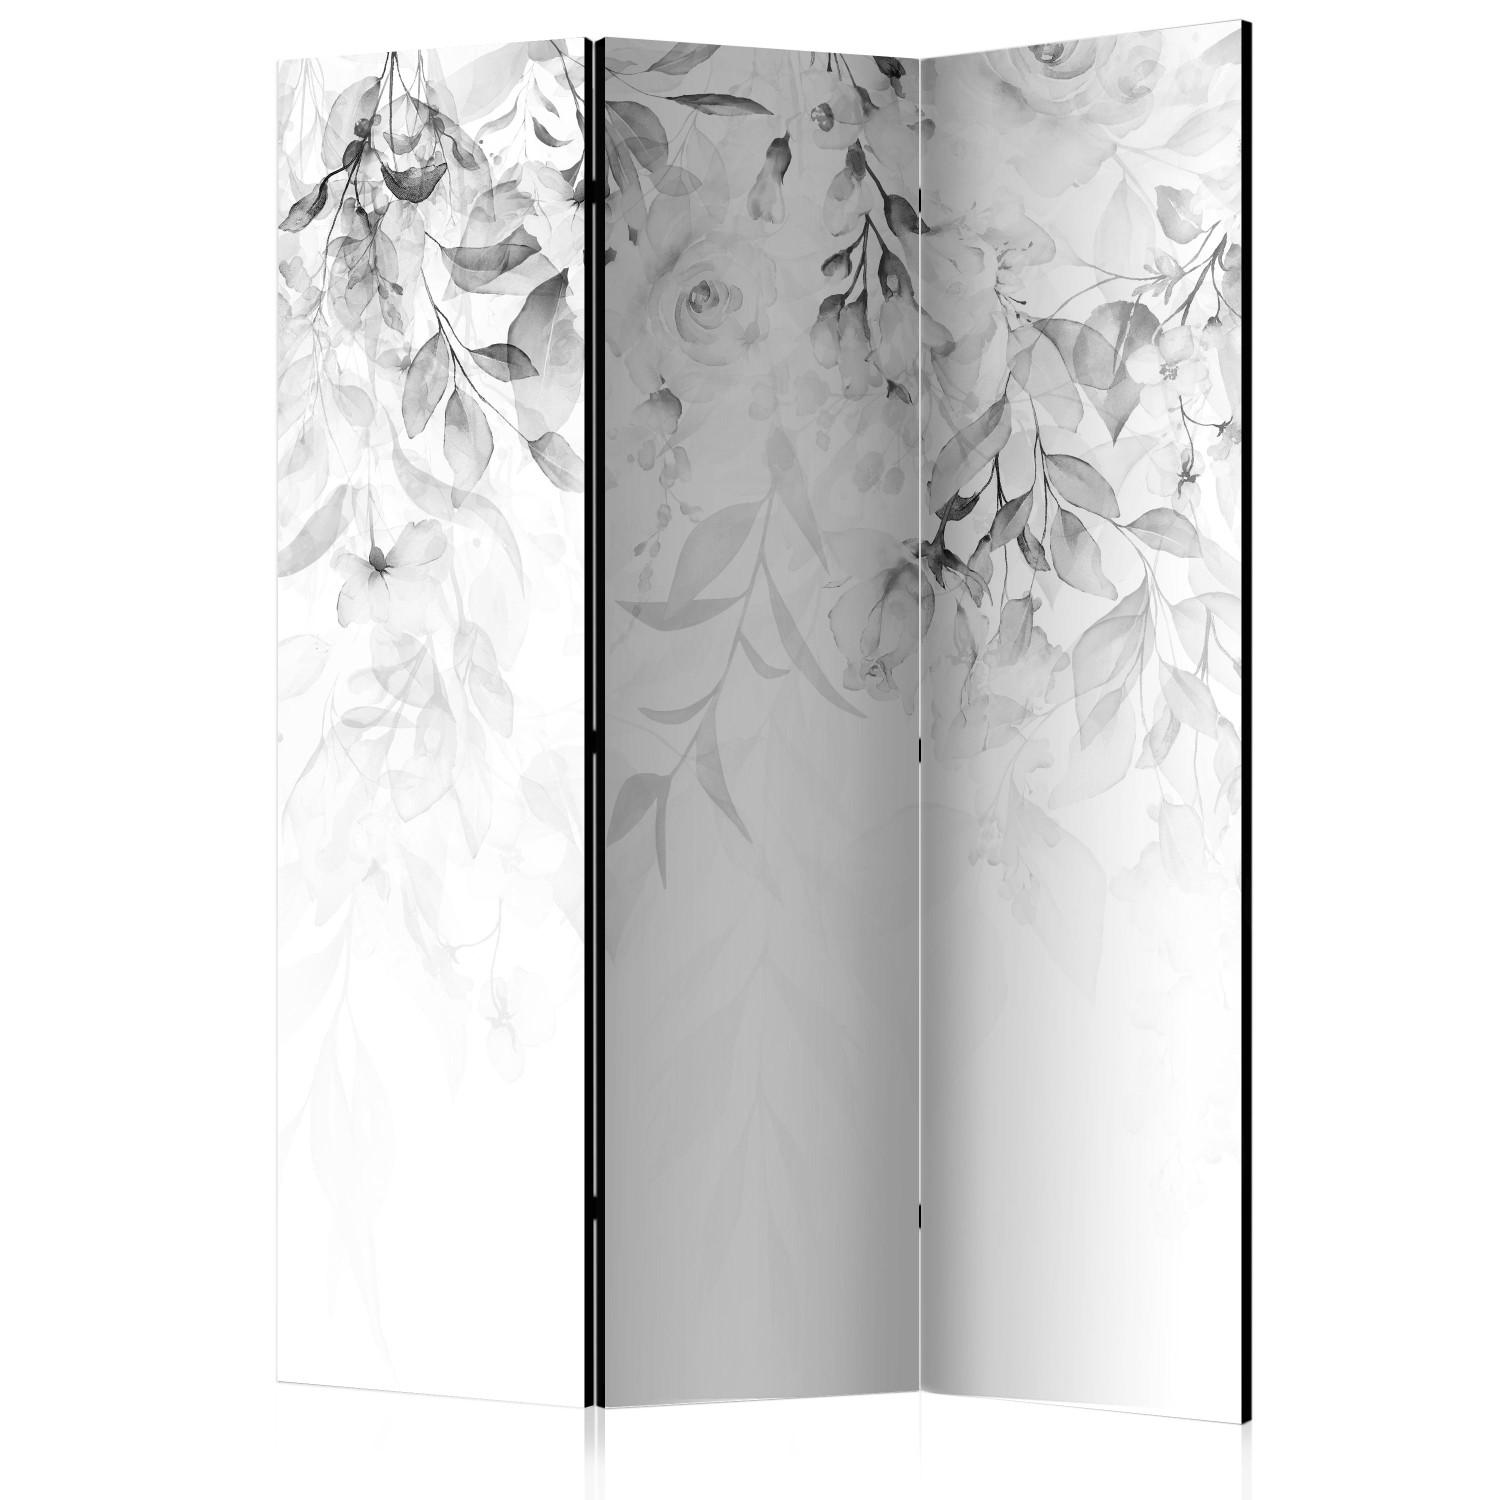 Room Divider Rose Waterfall - Third Variant (3-piece) - Gray flowers amidst white